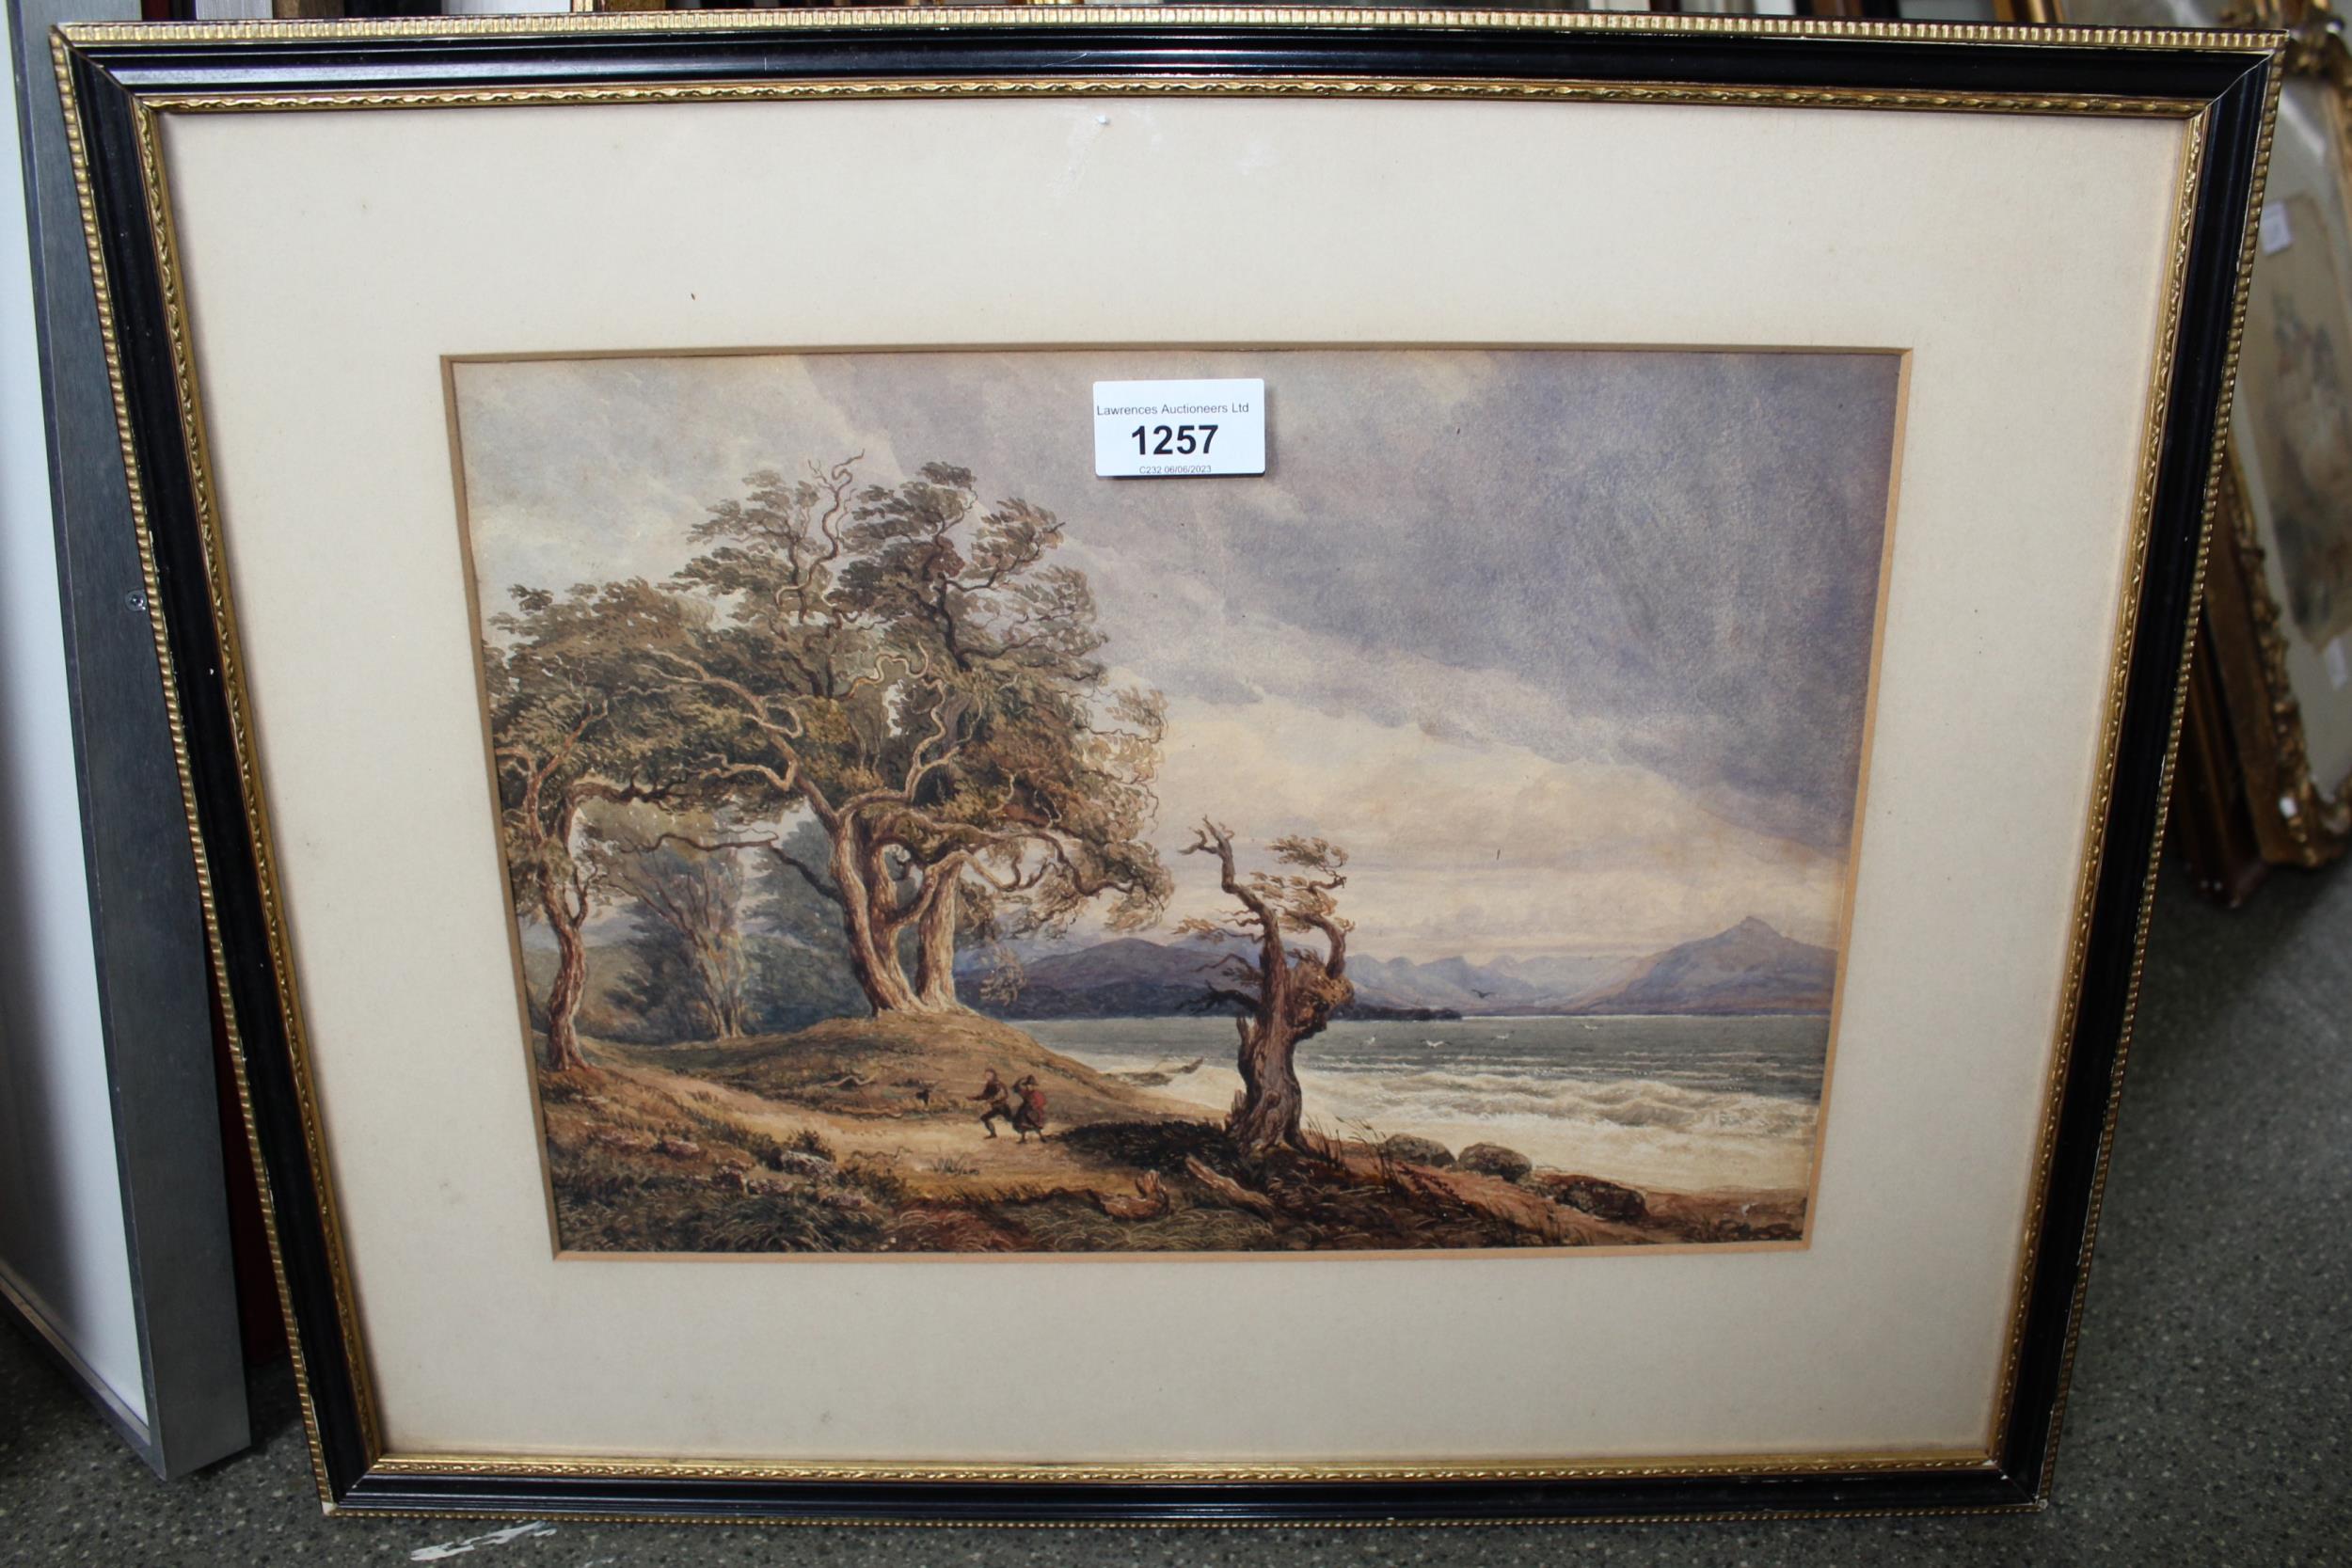 Late 18th / early 19th Century watercolour, landscape with figures by a loch on a windy day,